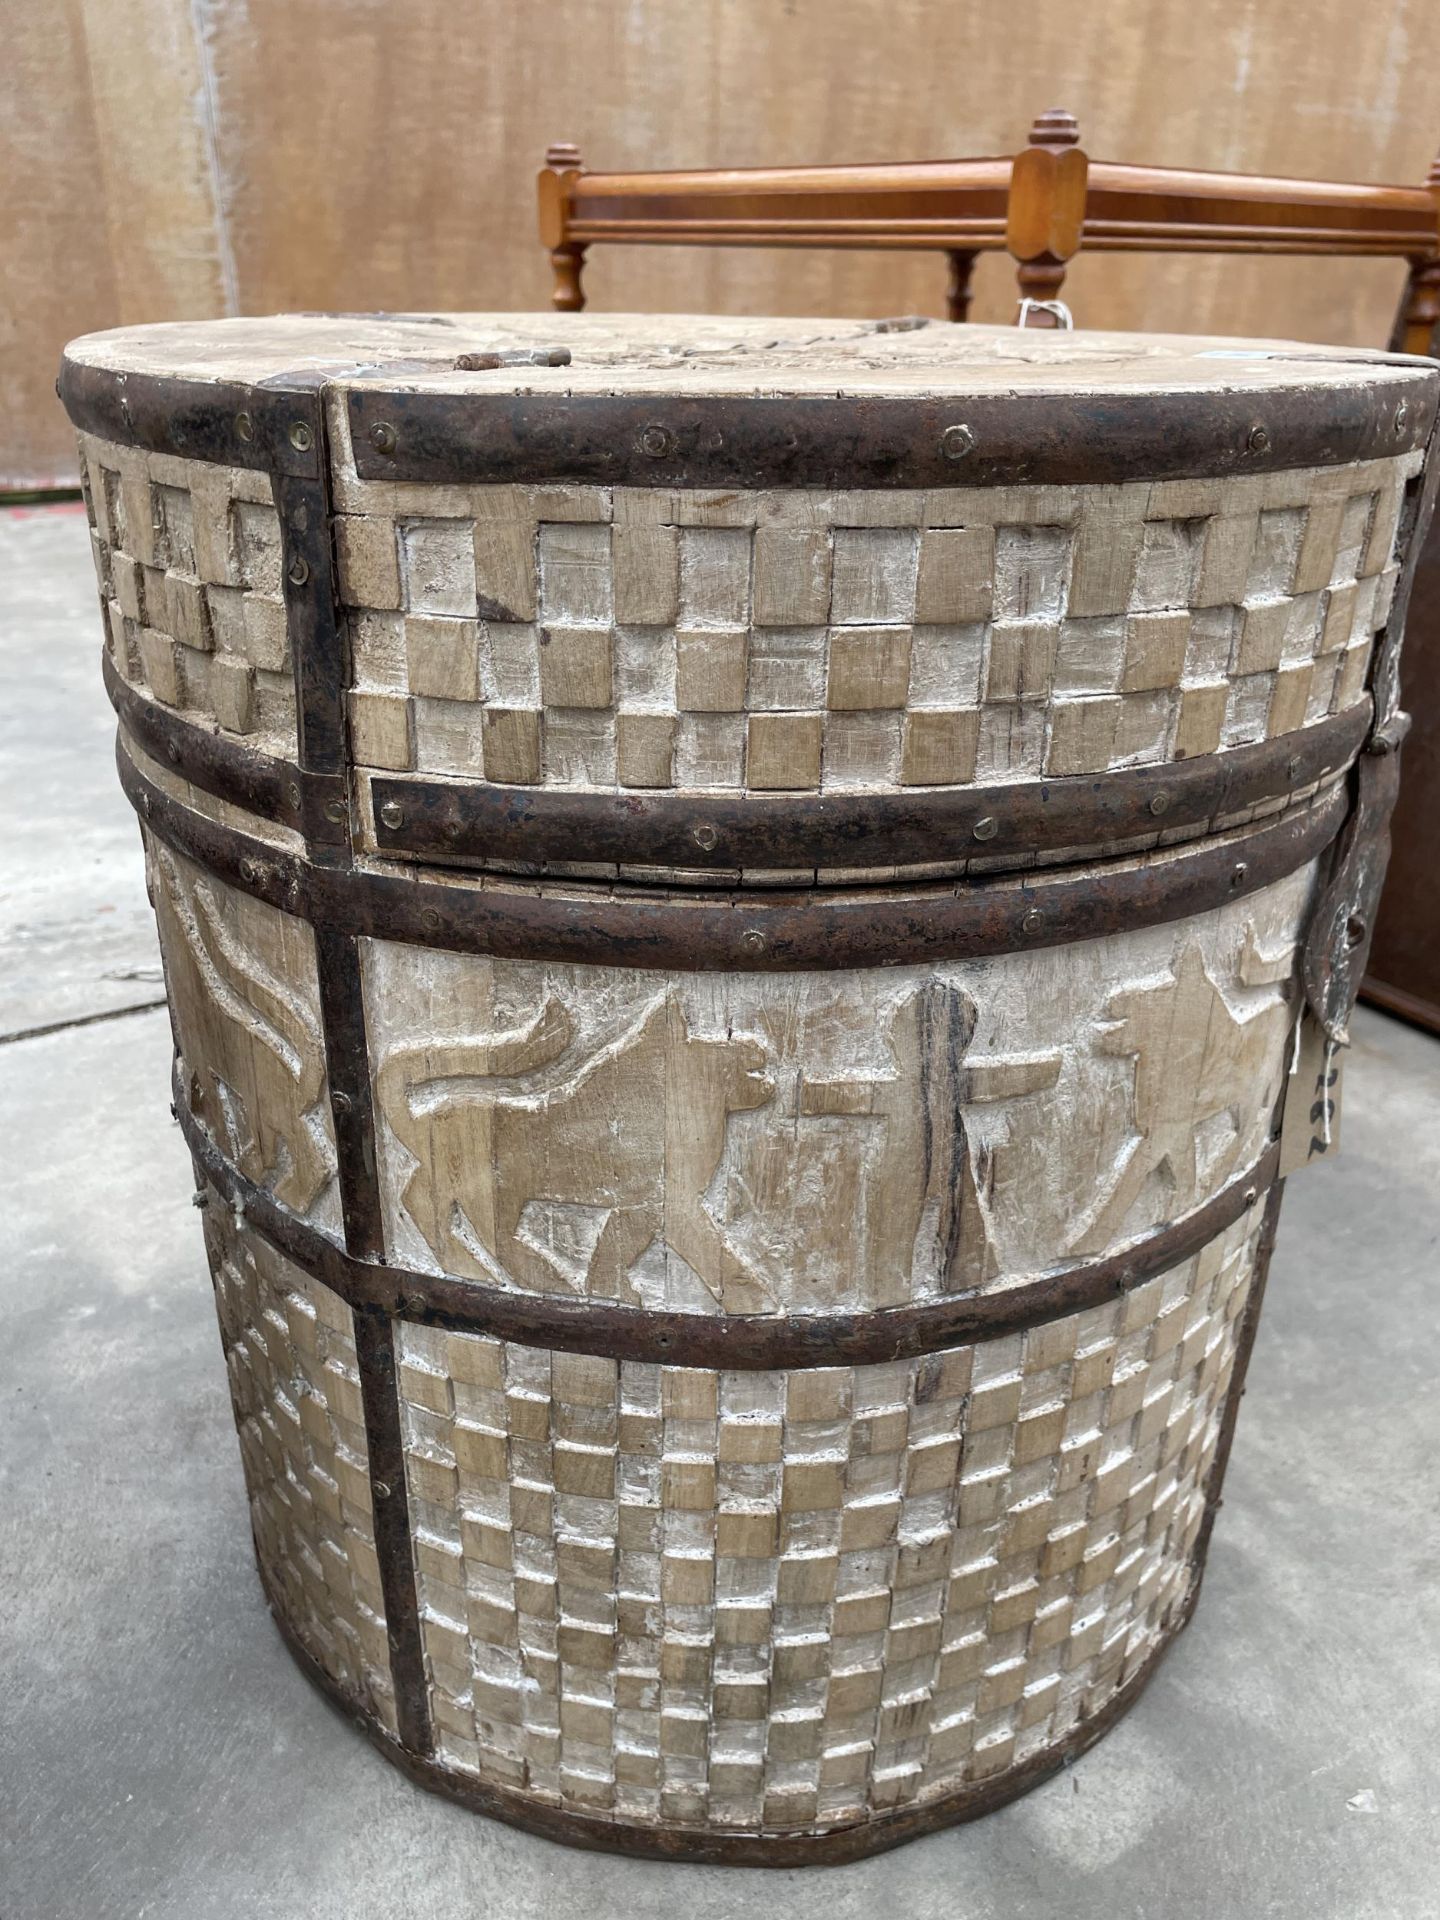 AN INDIAN HARDWOOD GRAIN/RICE DRUM CONTAINER WITH HINGED LID AND METALWARE FITTINGS DIAMETER 18" - Image 5 of 5